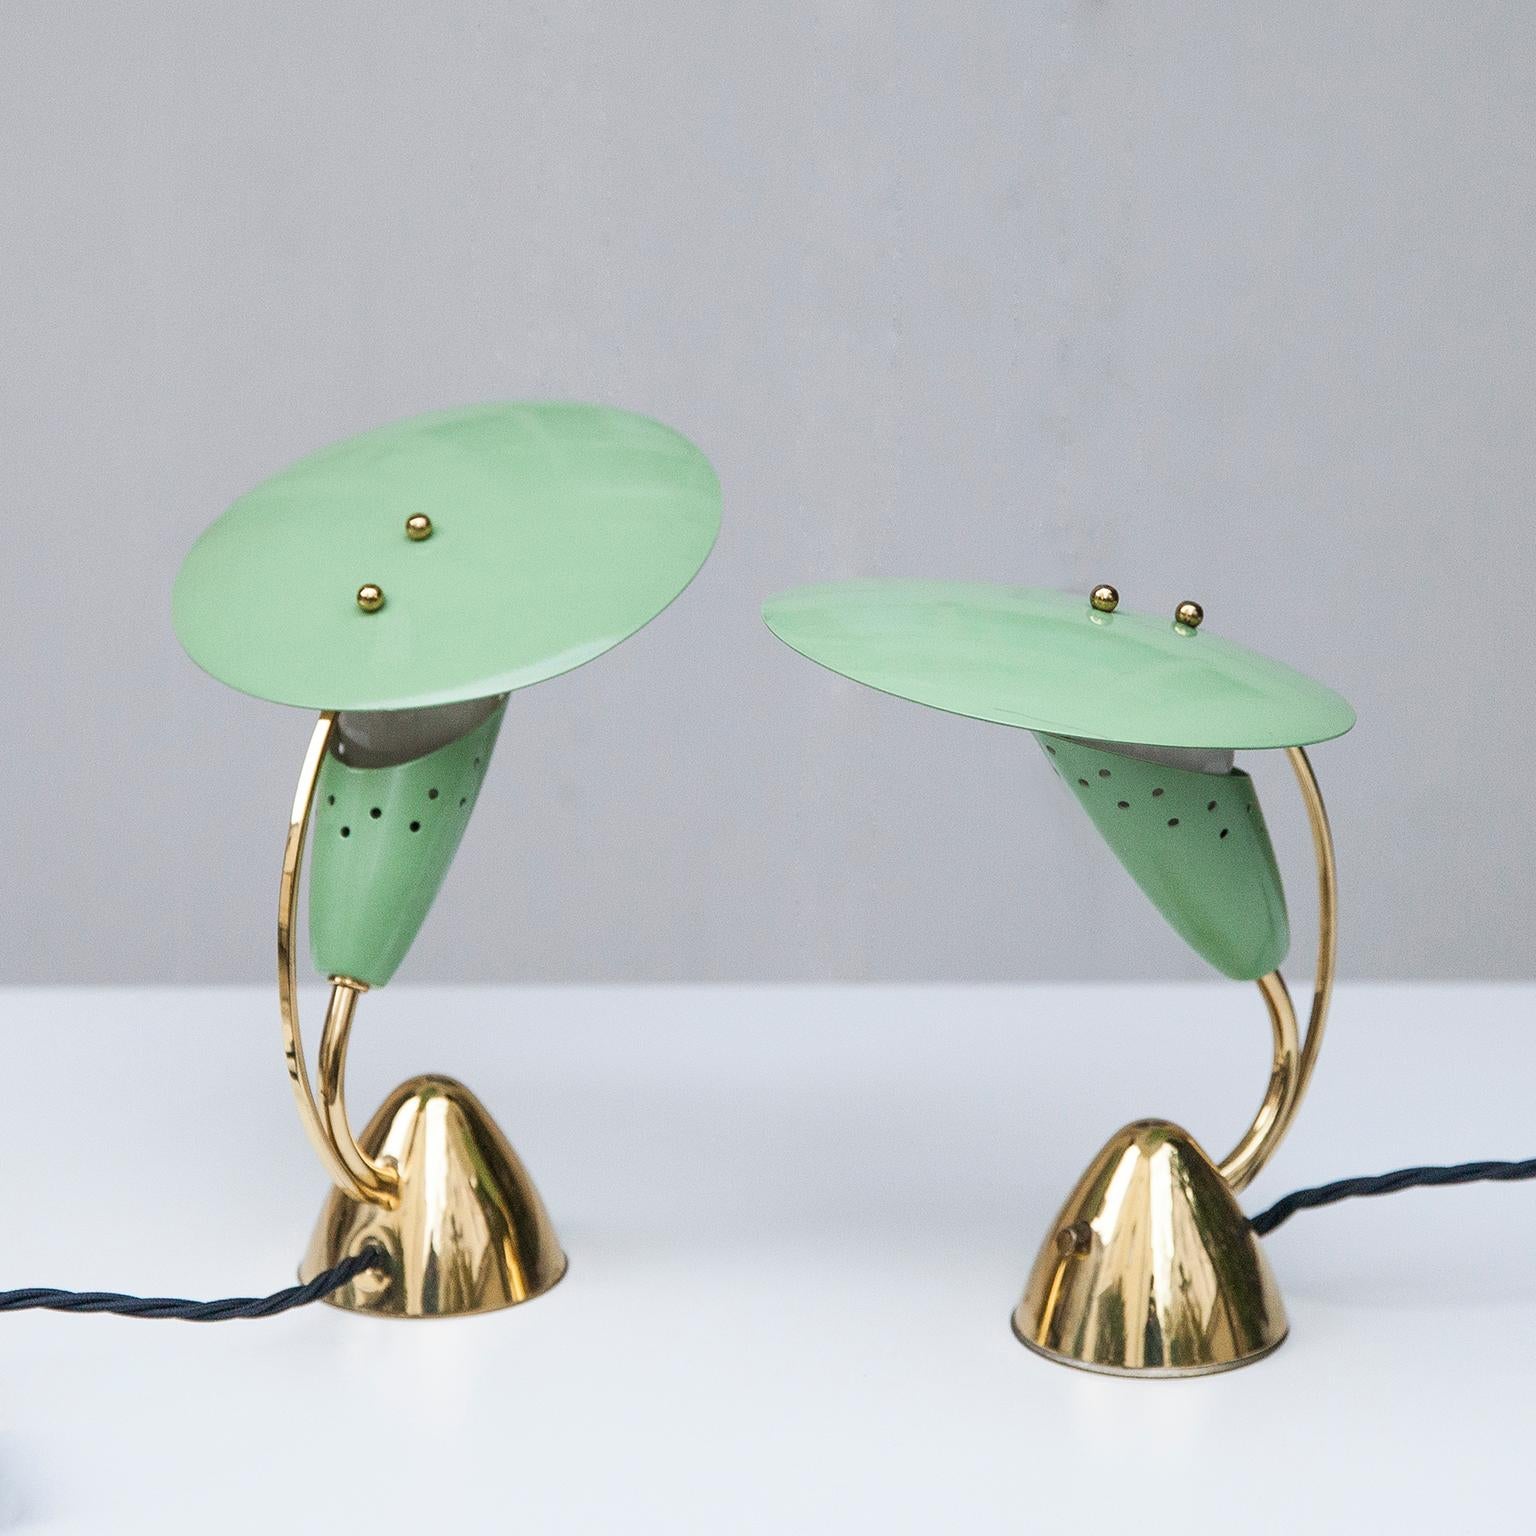 Nightstand table lamps in light green painted metal on an sculptural brass base, a extraordinary statement of the 1950s design.